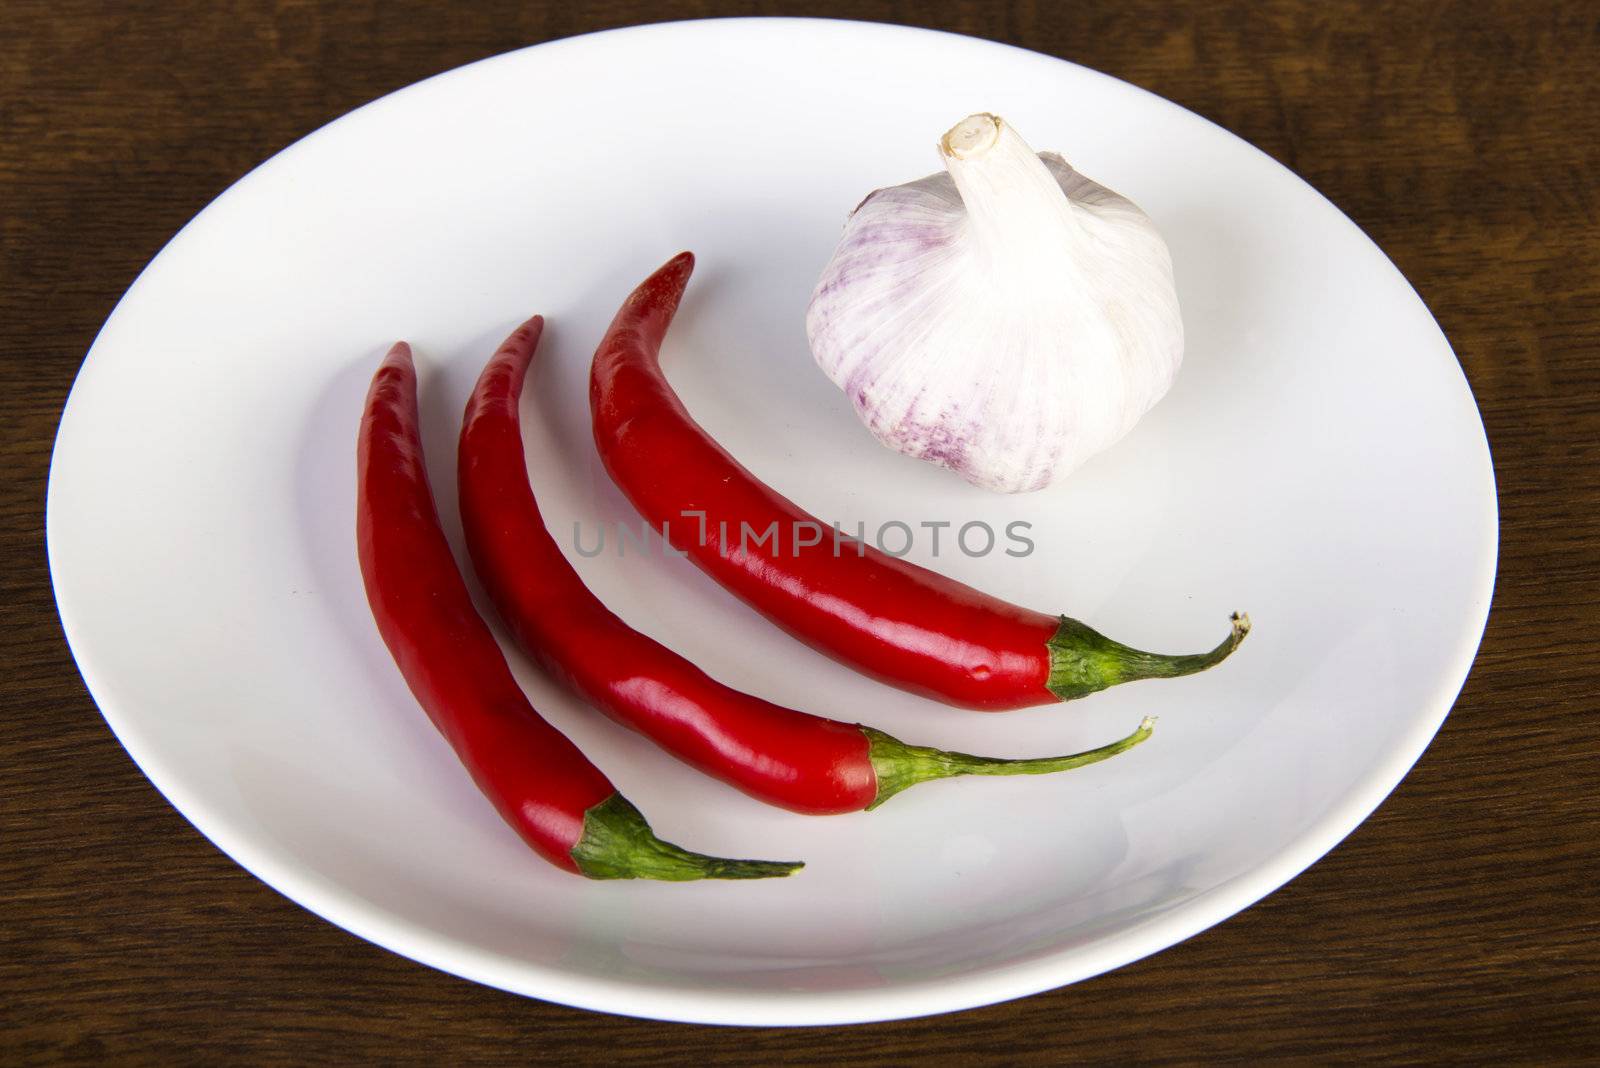 Red chili peppers and garlic on plate